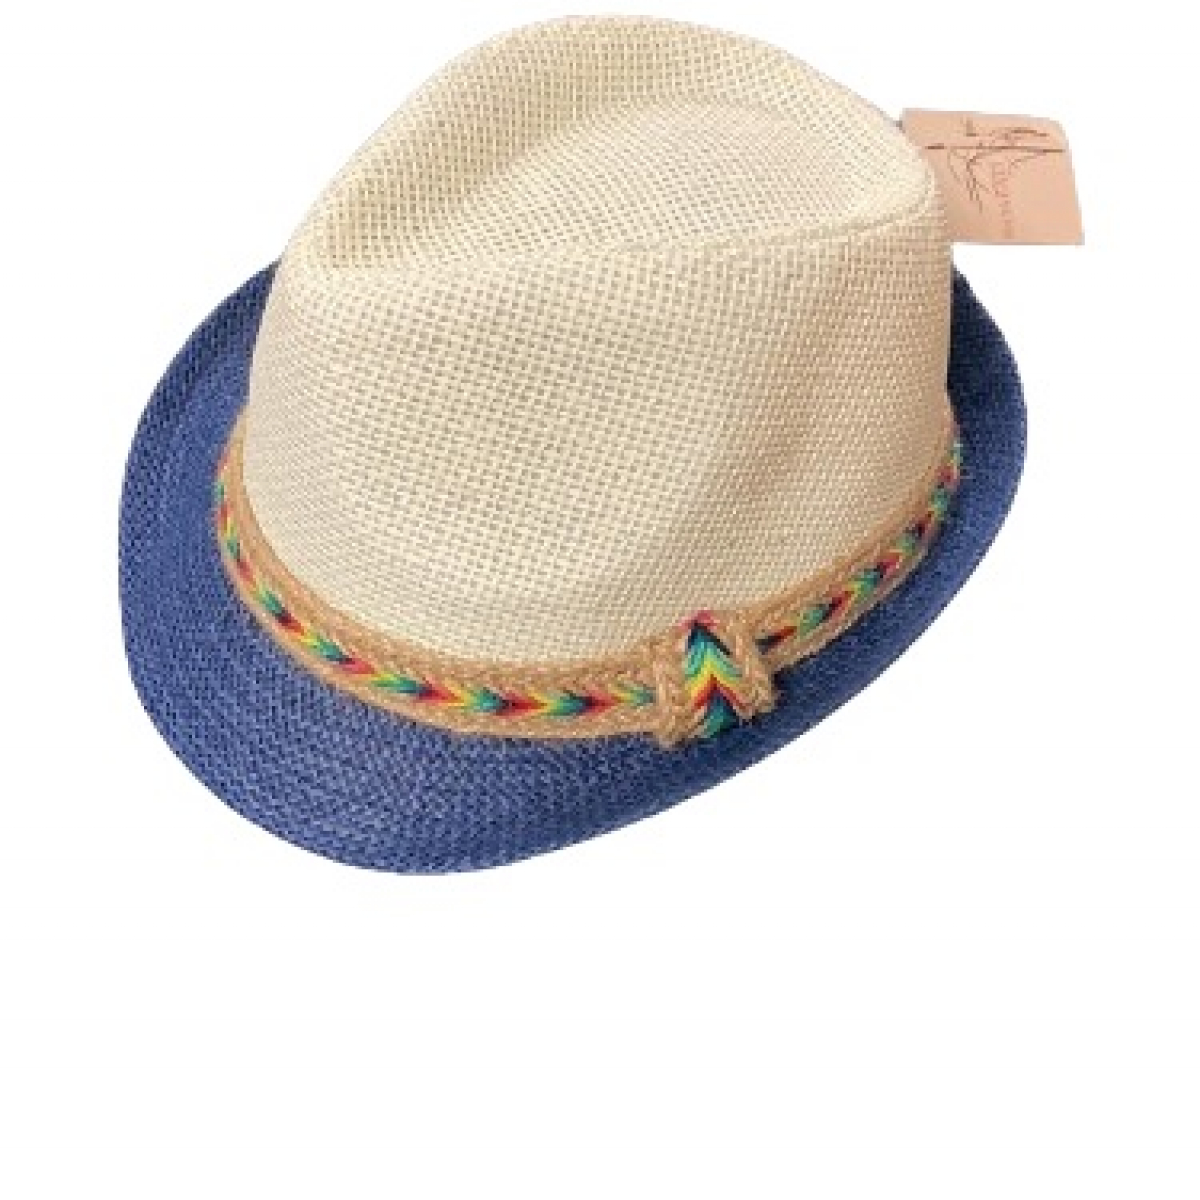 Multicoloured hat for adults